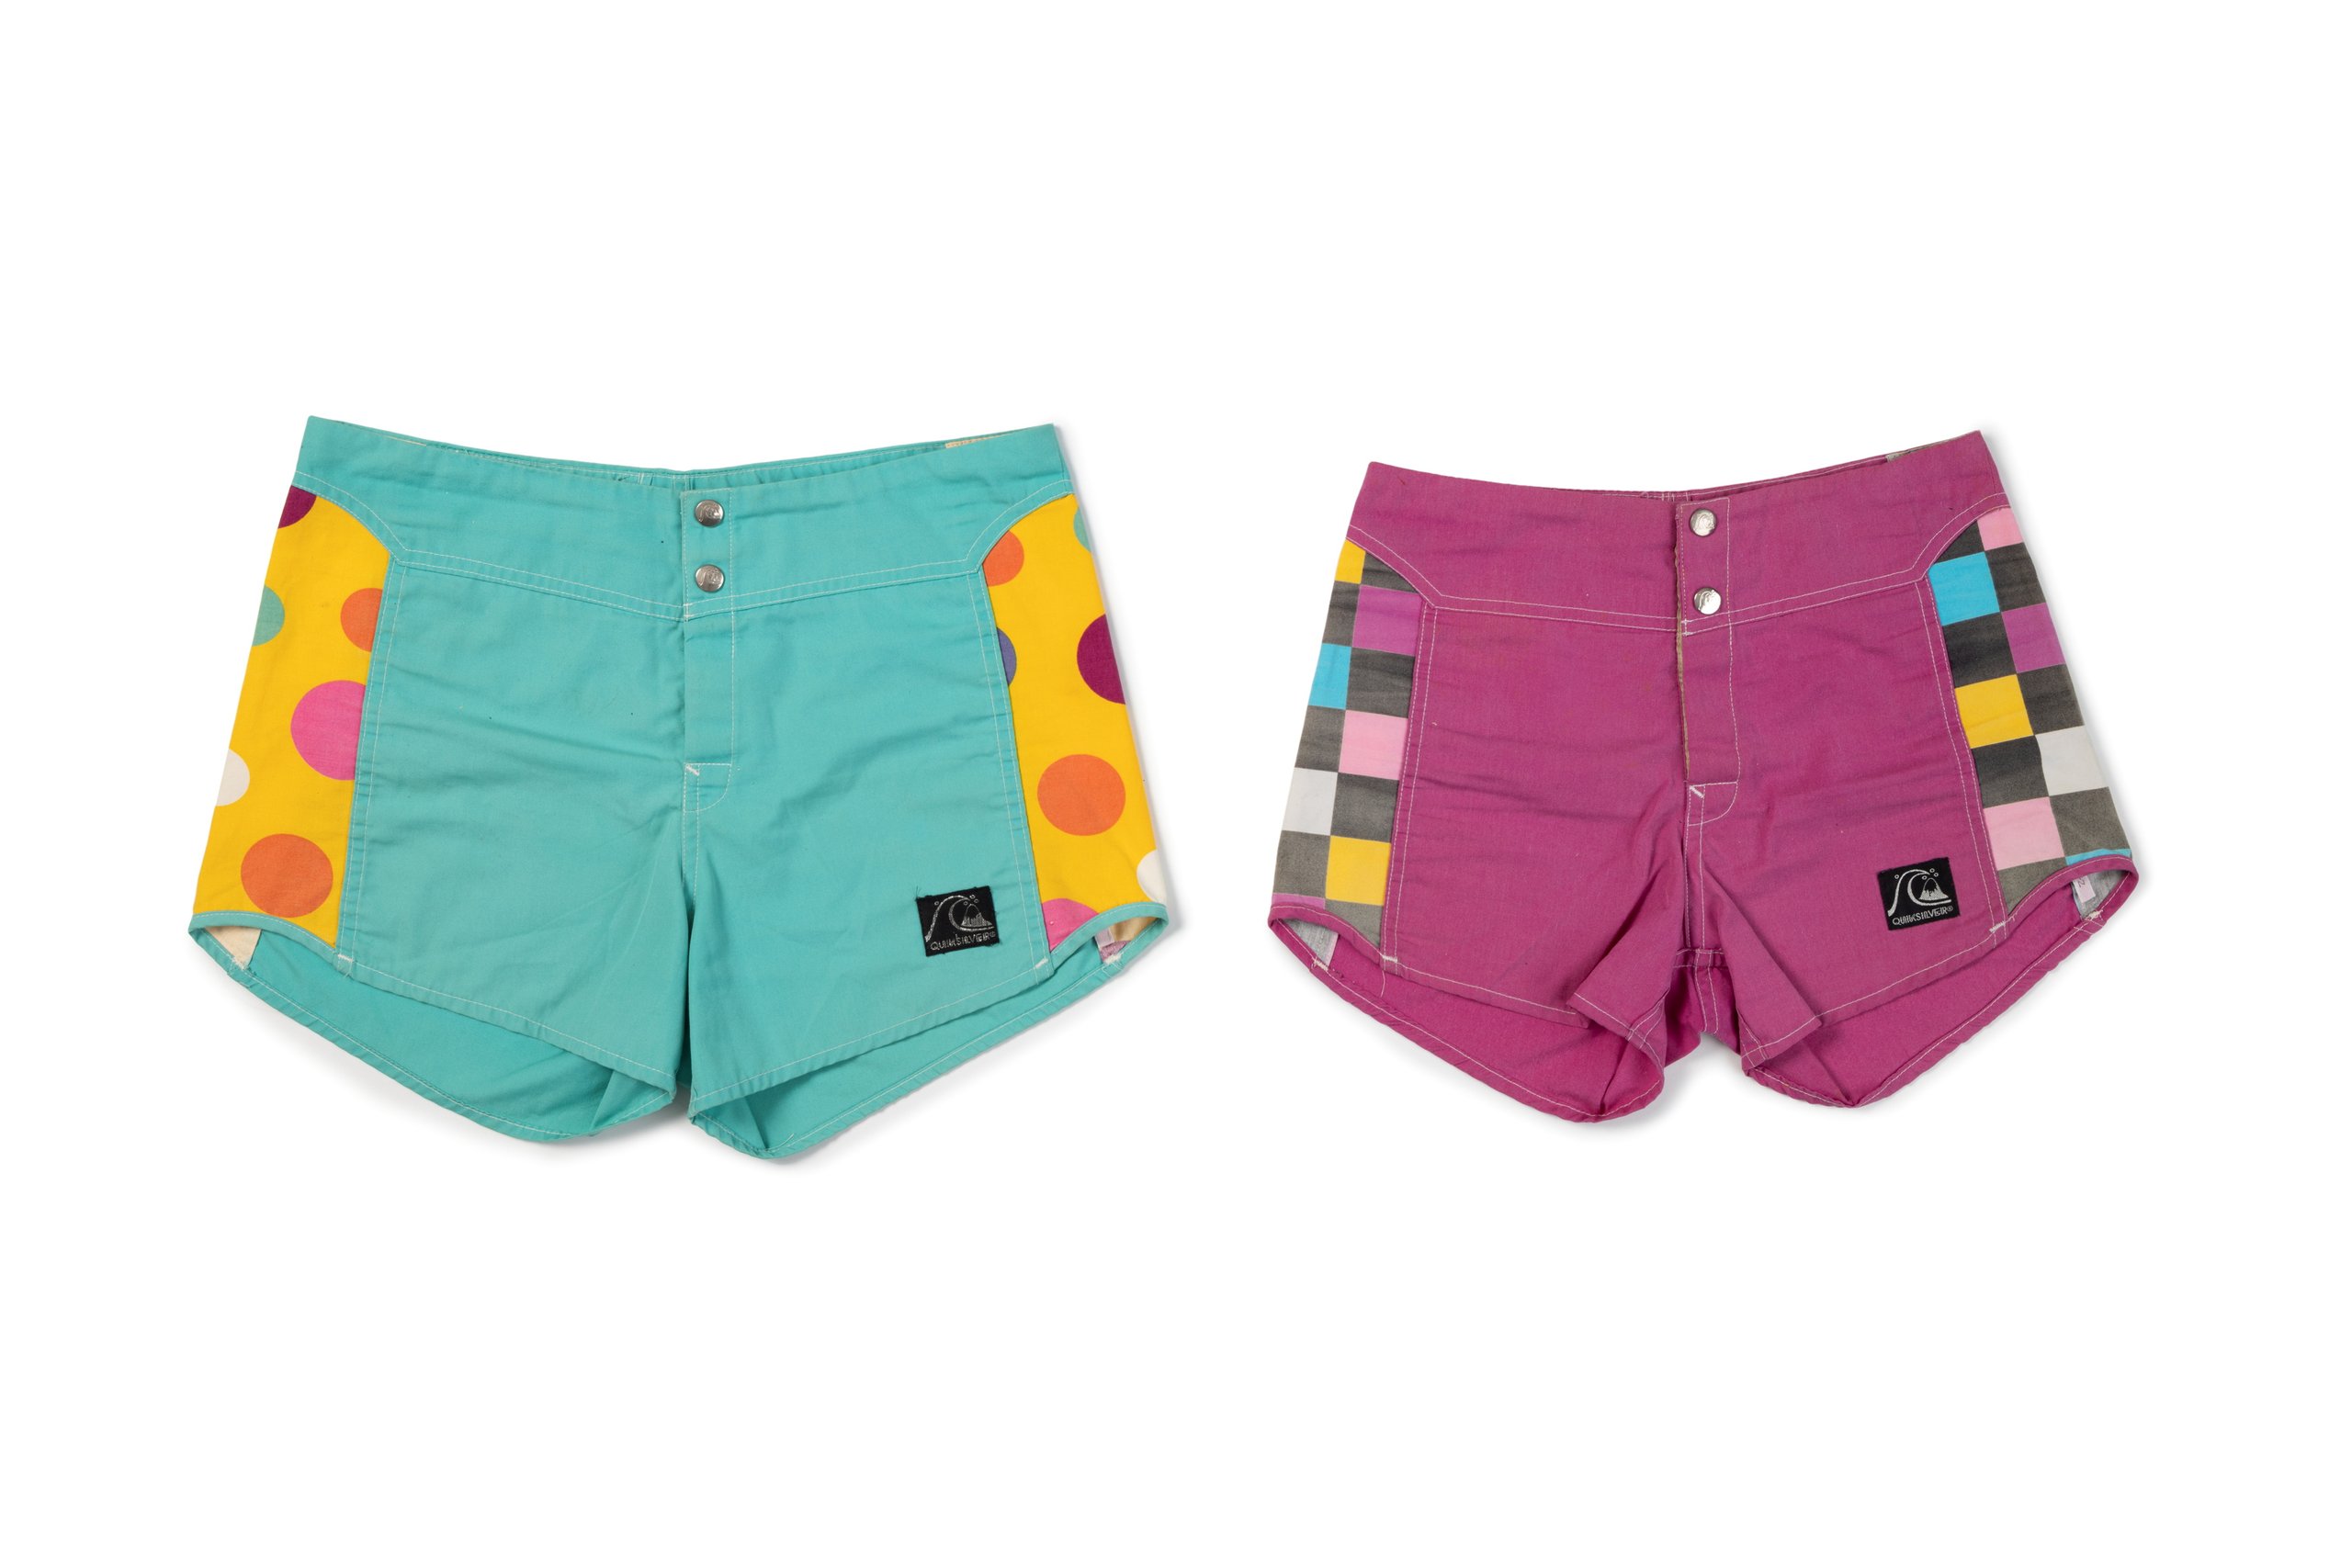 Boardshorts made by Quicksilver